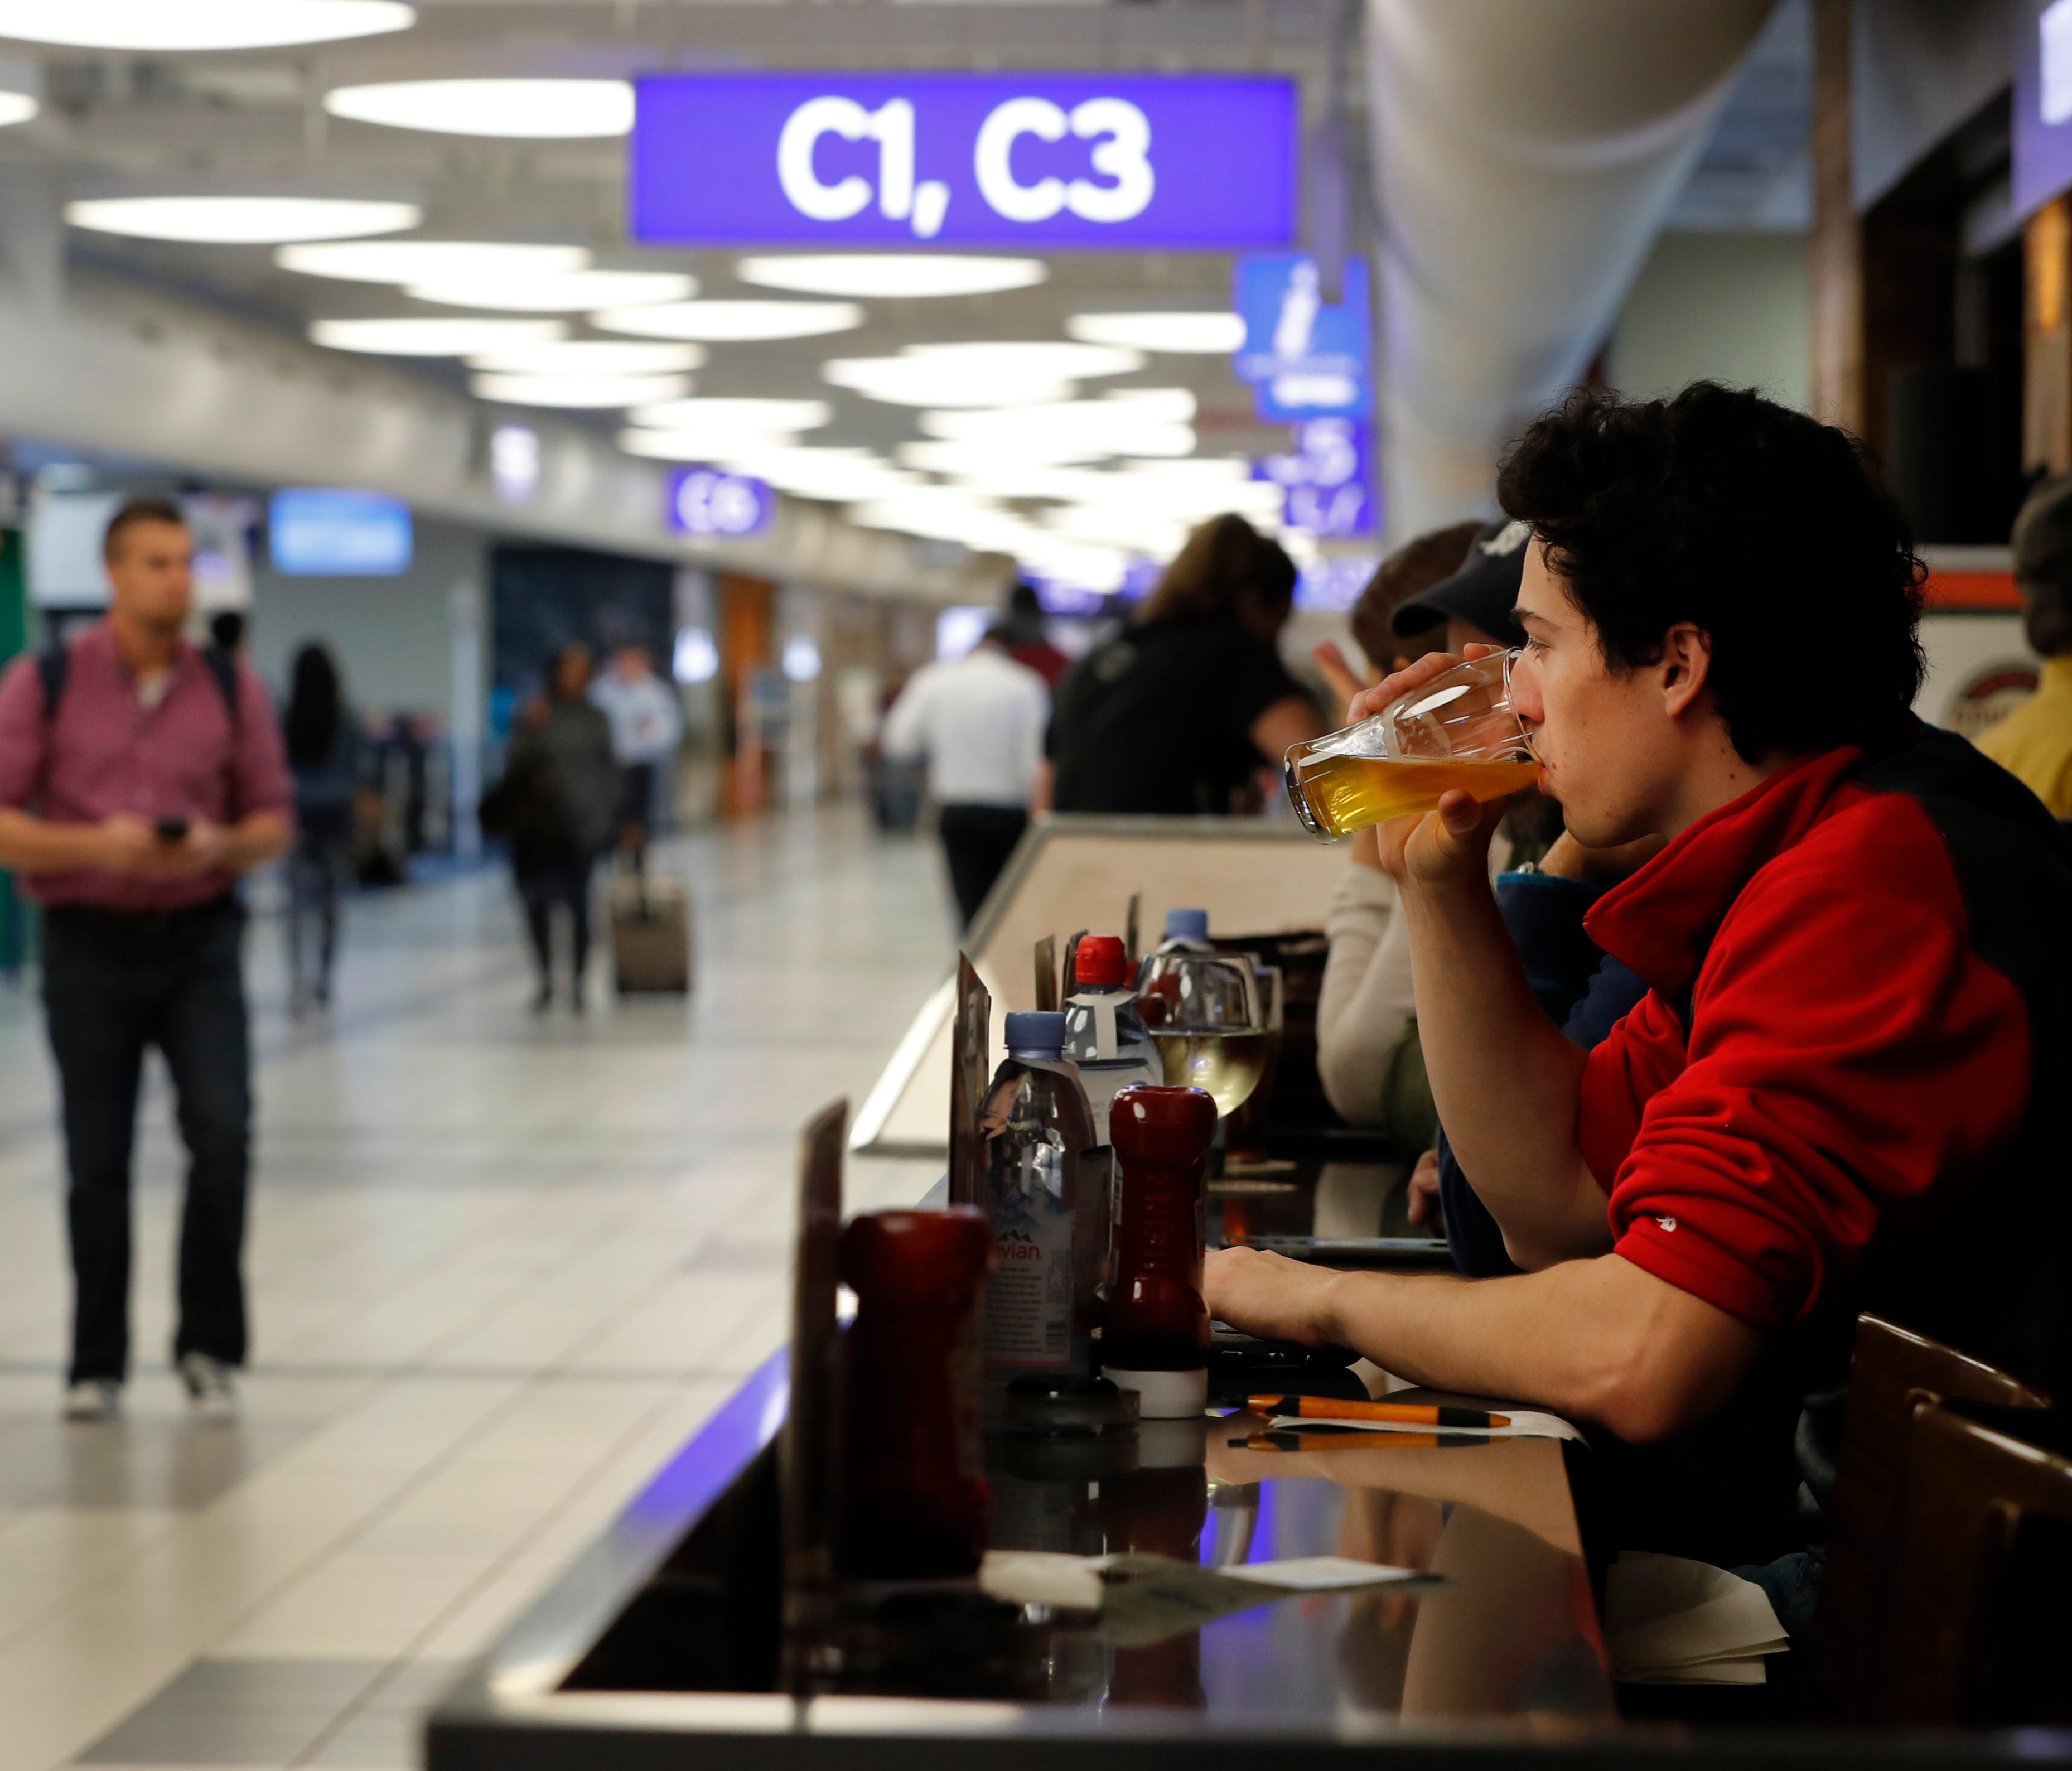 In this photo from Feb. 24, 2017, traveler Dominic Maley sips on a beer while waiting to board a flight at St. Louis Lambert International Airport.